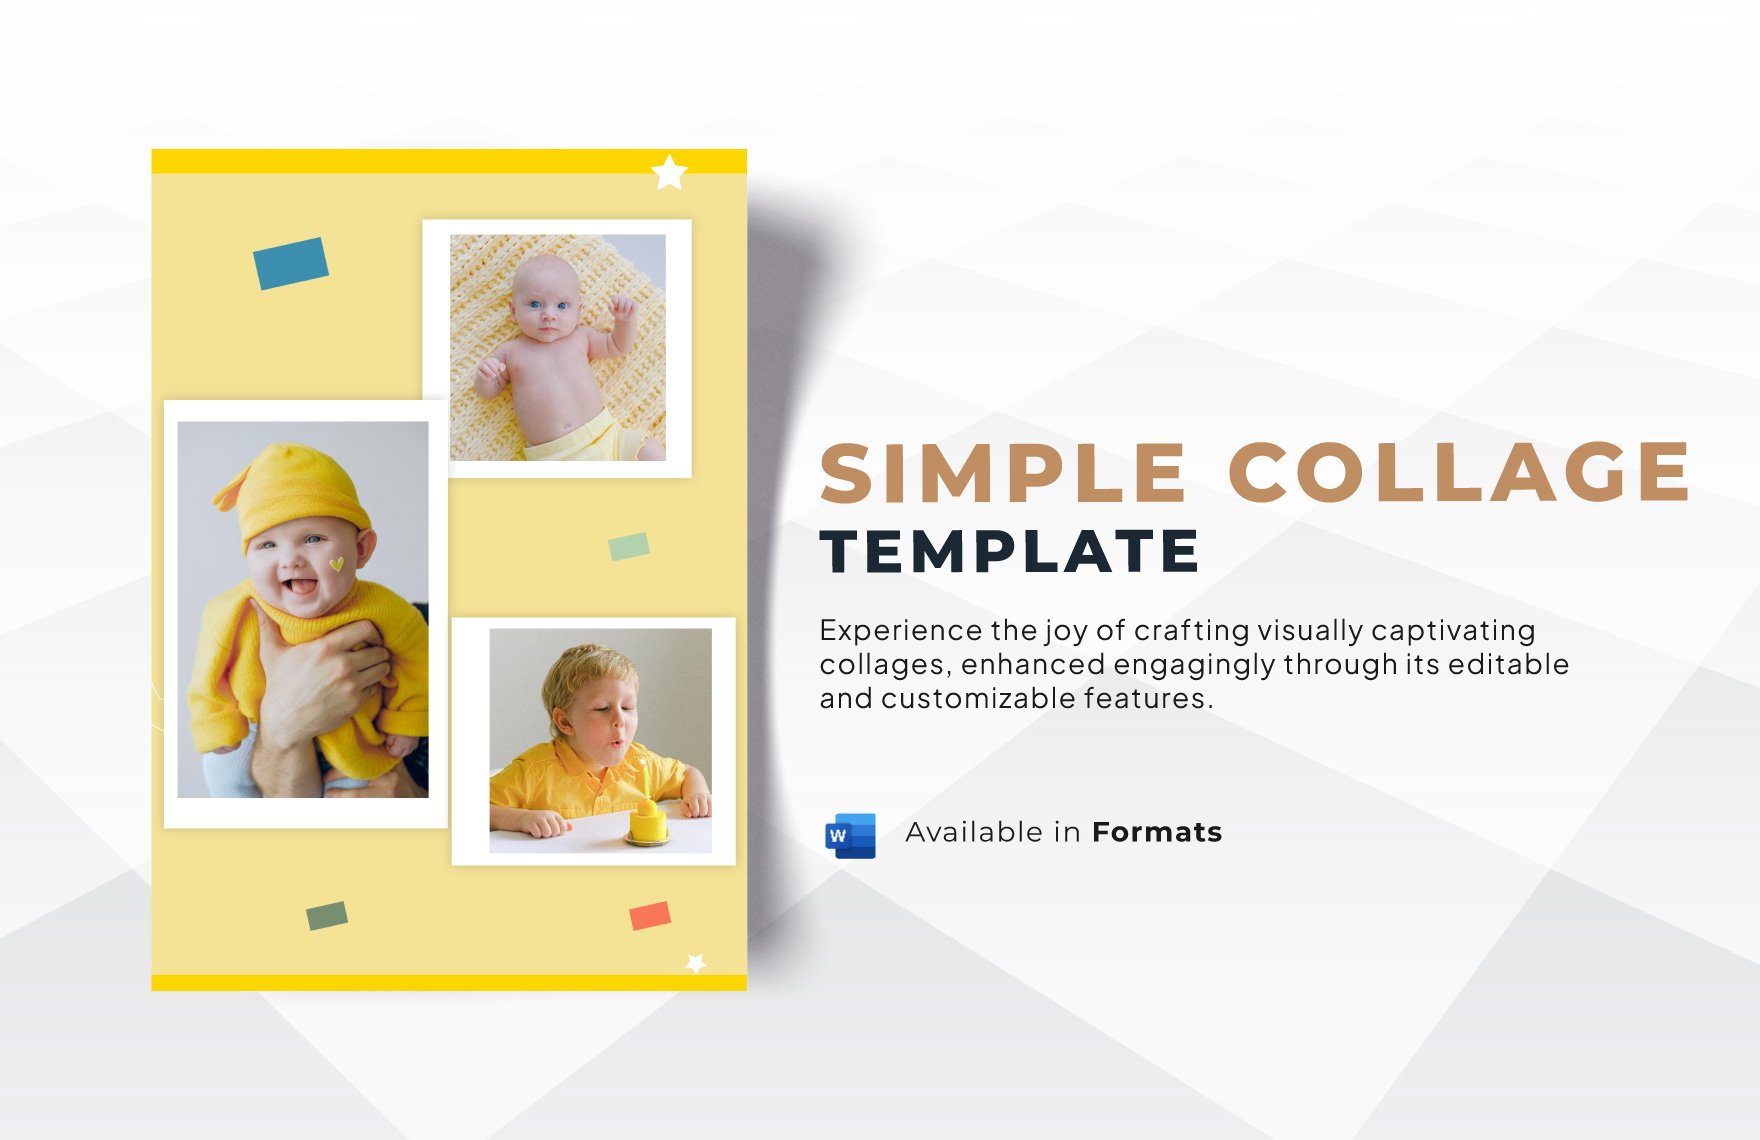 Simple Collage Template